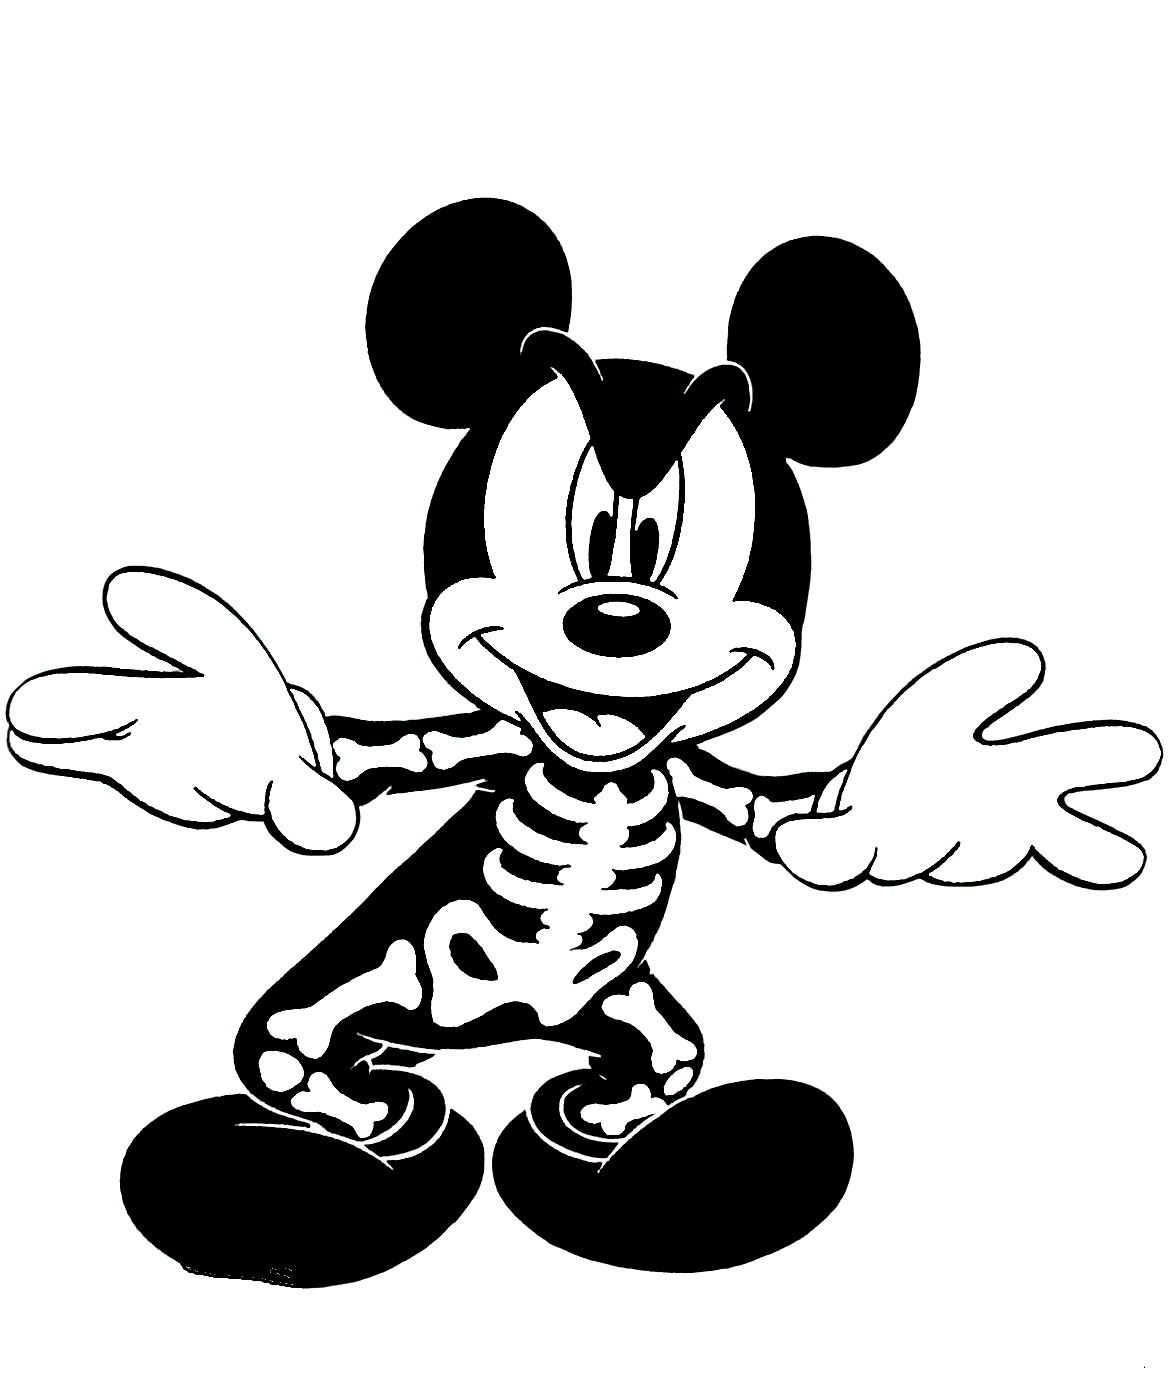 Mickey Mouse Halloween Coloring Page